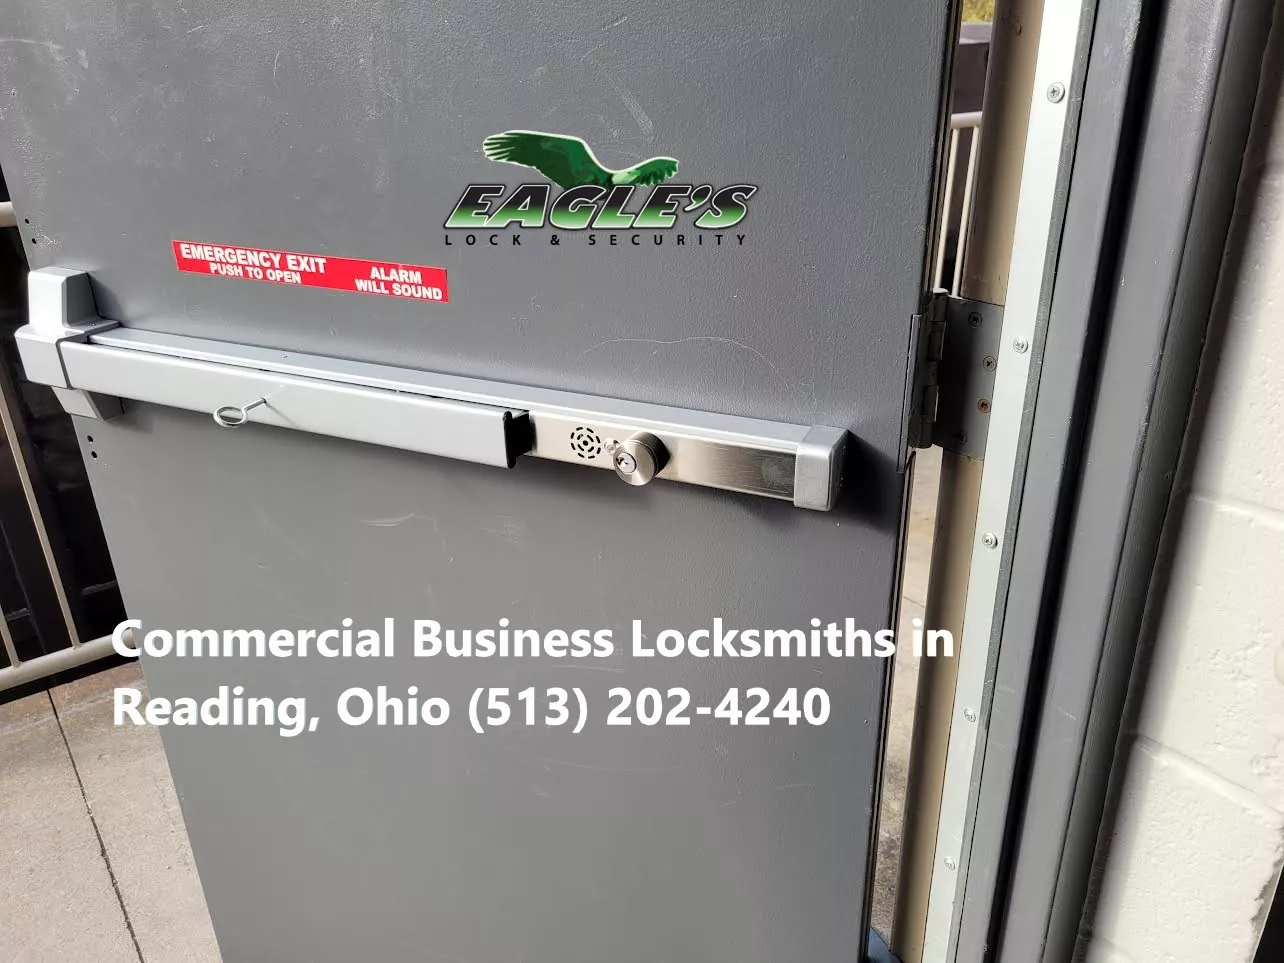 Commercial Business Locksmiths in Reading, Ohio